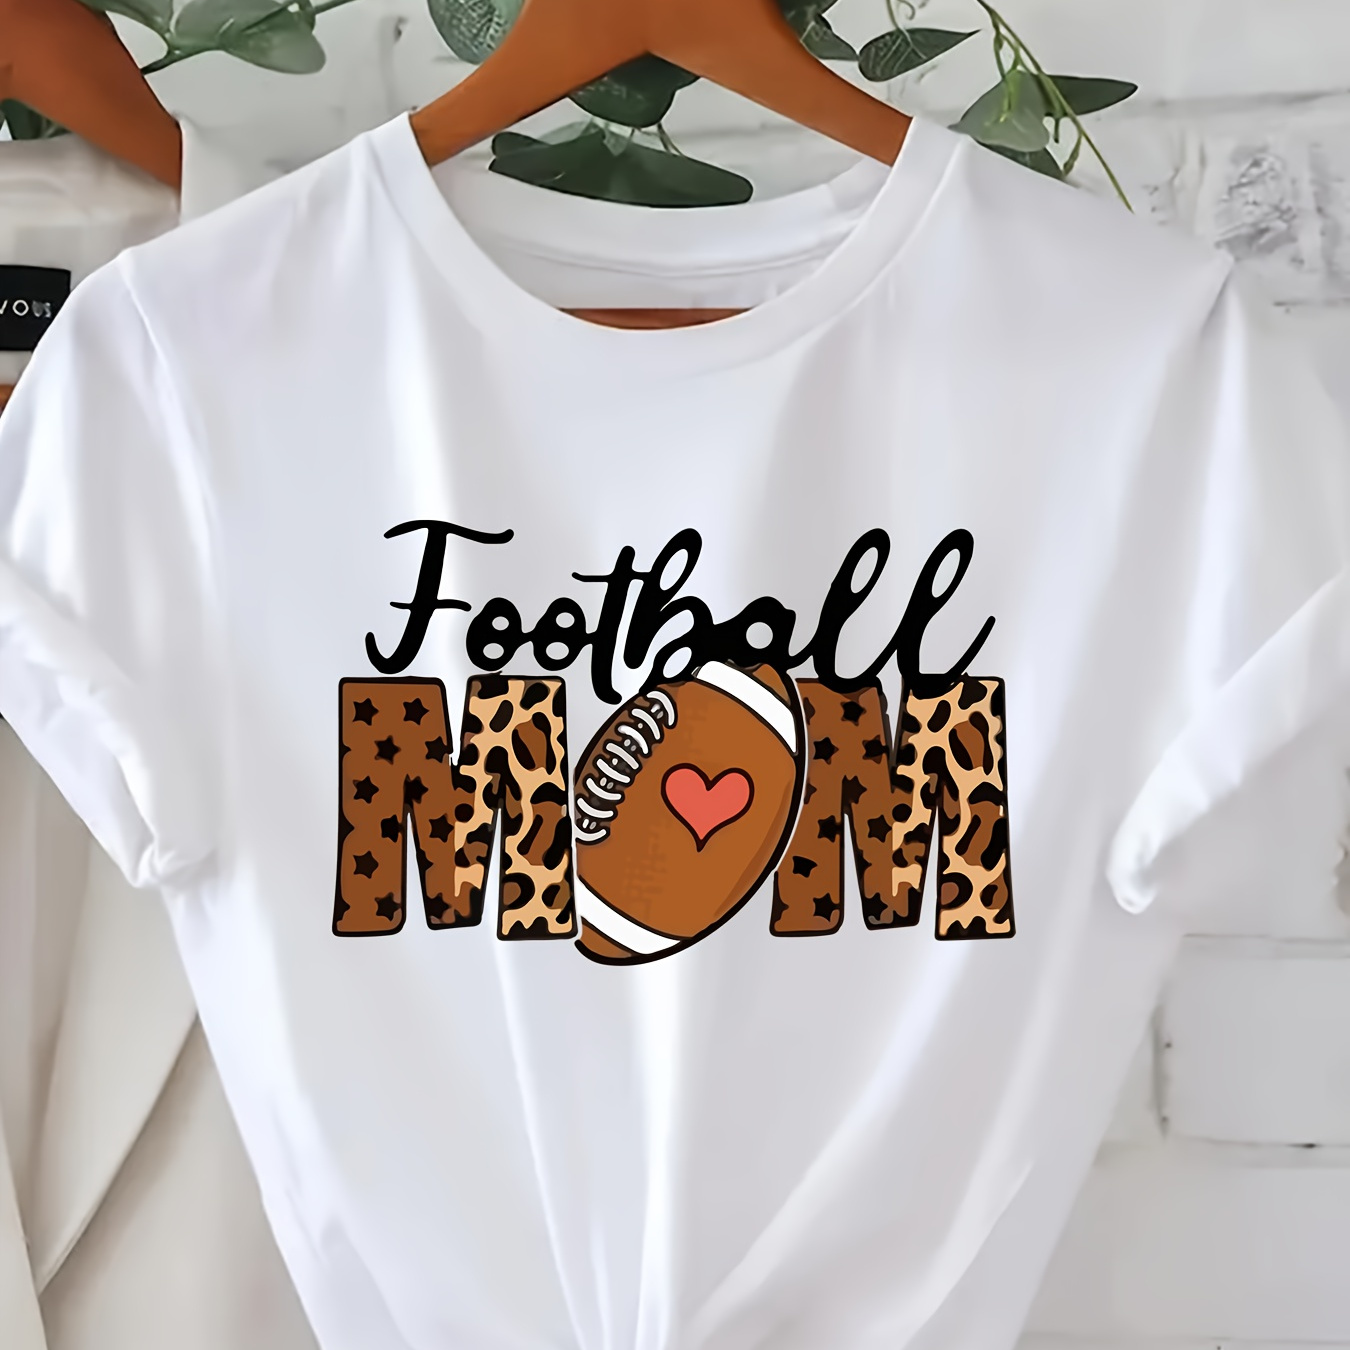 

Plus Size Football & Mom Print T-shirt, Short Sleeve Crew Neck Casual Top For Summer & Spring, Women's Plus Size Clothing